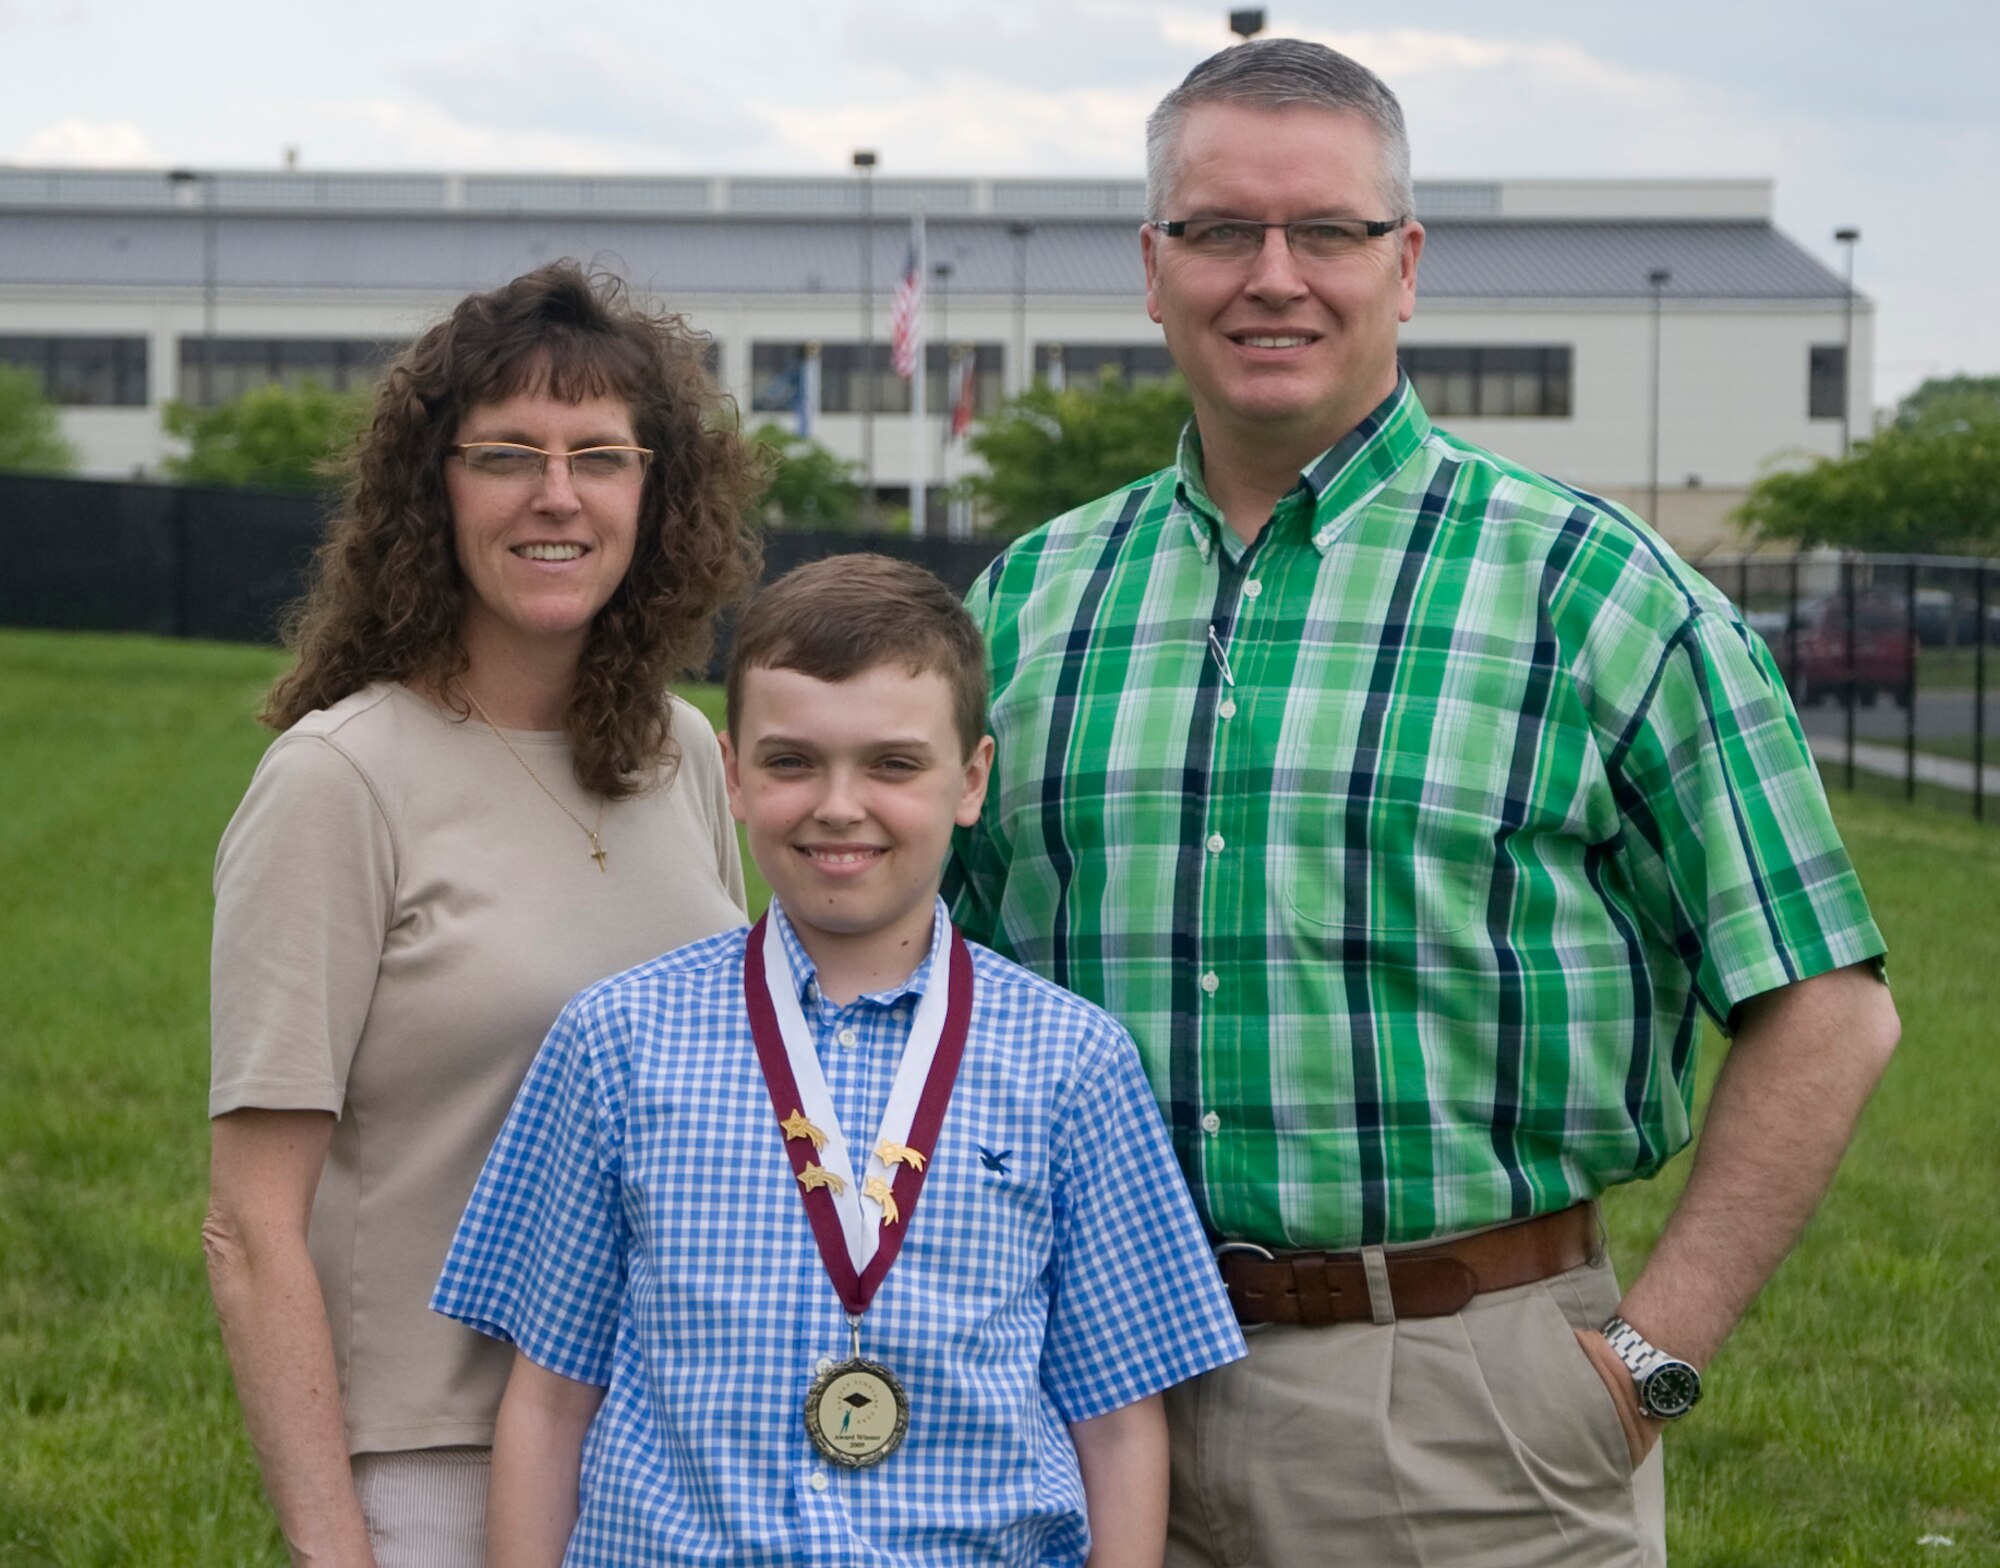 Alden Tonkay, five-time winner of the Carson Scholarship, poses with his parents Jack Tonkay, Joint Personal Effects Depot information technology specialist, and Laurie Tonkay, Welch Elementary School third-grade school teacher, May 10, 2013, Dover Air Force, Del. Carson Scholarships are awarded to students in grades 4-11 who exemplify academic excellence and humanitarian qualities..)